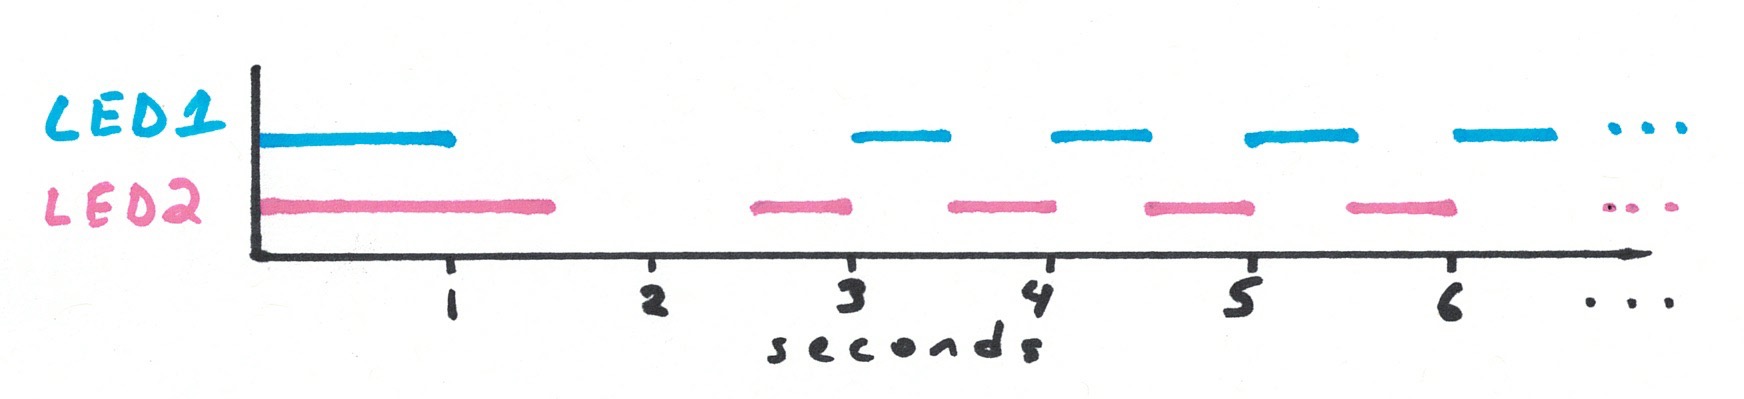 Image of a graph with two lines; LED1 is on from 0 seconds through 1 second, then off, then on between 3 and 3.5 seconds, then off; then on between 4 and 4.5 seconds, then off, and continuing in that pattern. LED2 is on from 0 seconds through 1.5 seconds, then off; then on between 2.5 and 3 seconds, then off; then on from 3.5 to 4 seconds, then off, and continuing in that pattern.